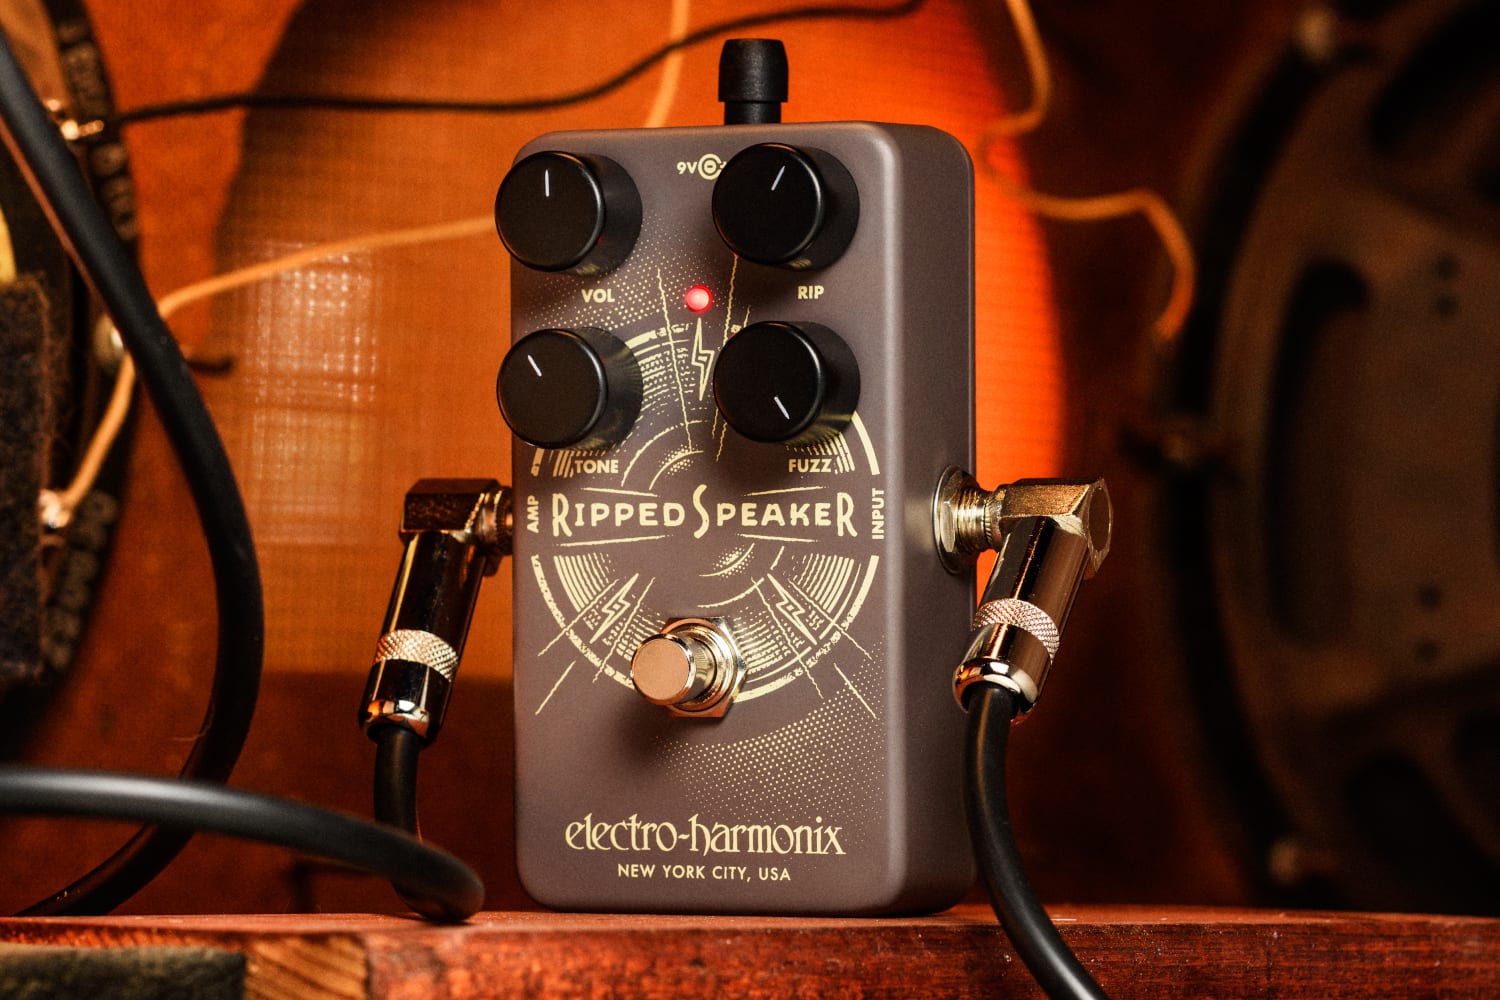 New Gear Review: Ripped Speaker by Electro-Harmonix